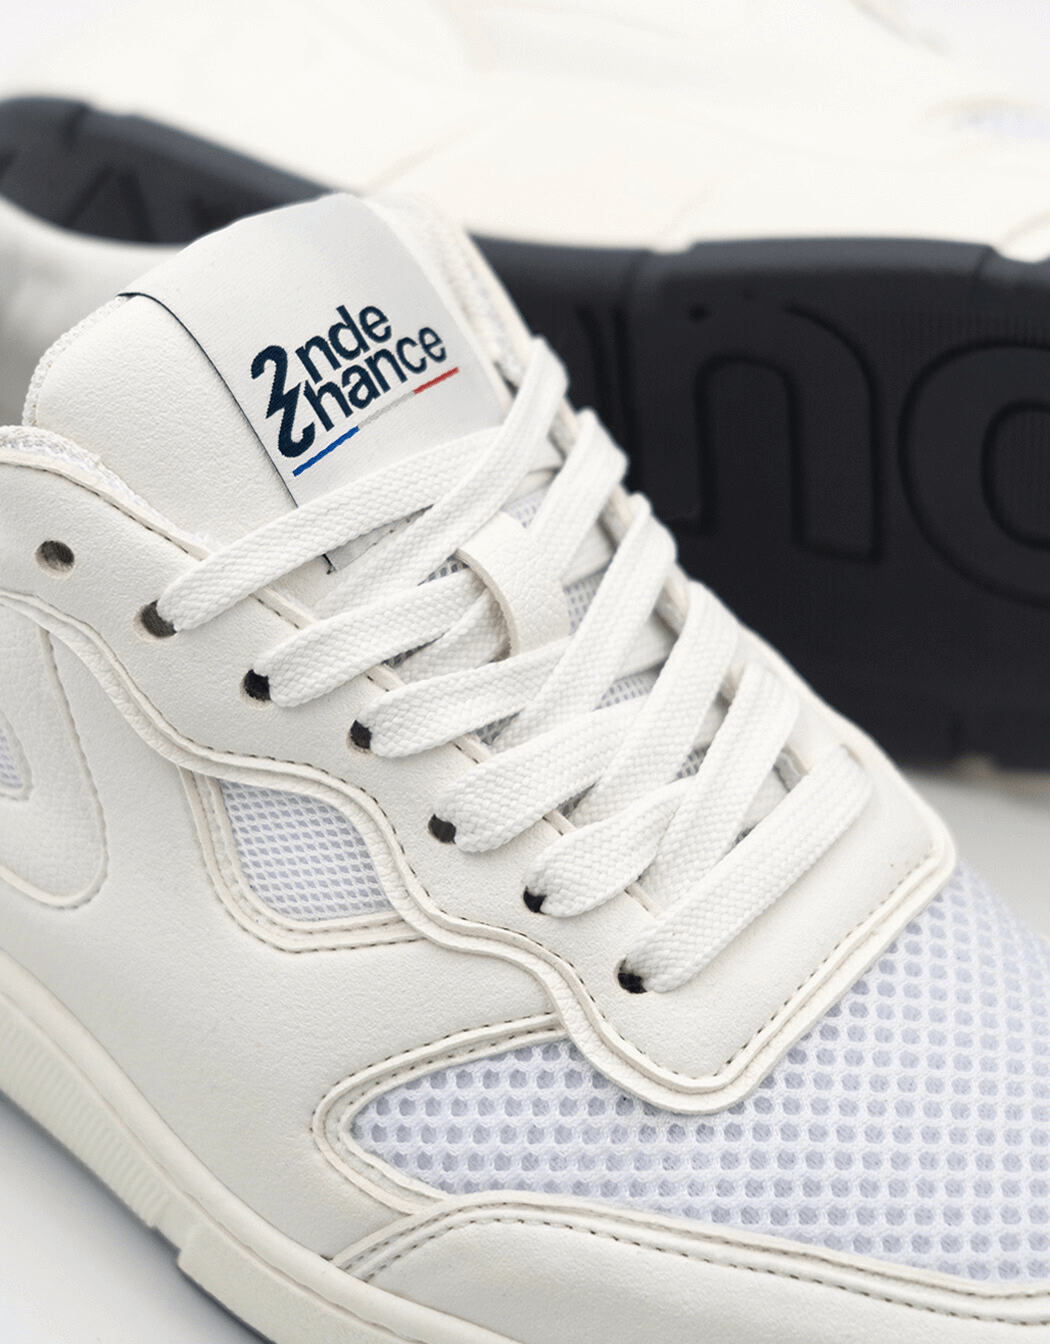 sneakers-neo-loopr3-2ndechance-white-recyclees-recyclable-madeinfrance-ambiance-dessus